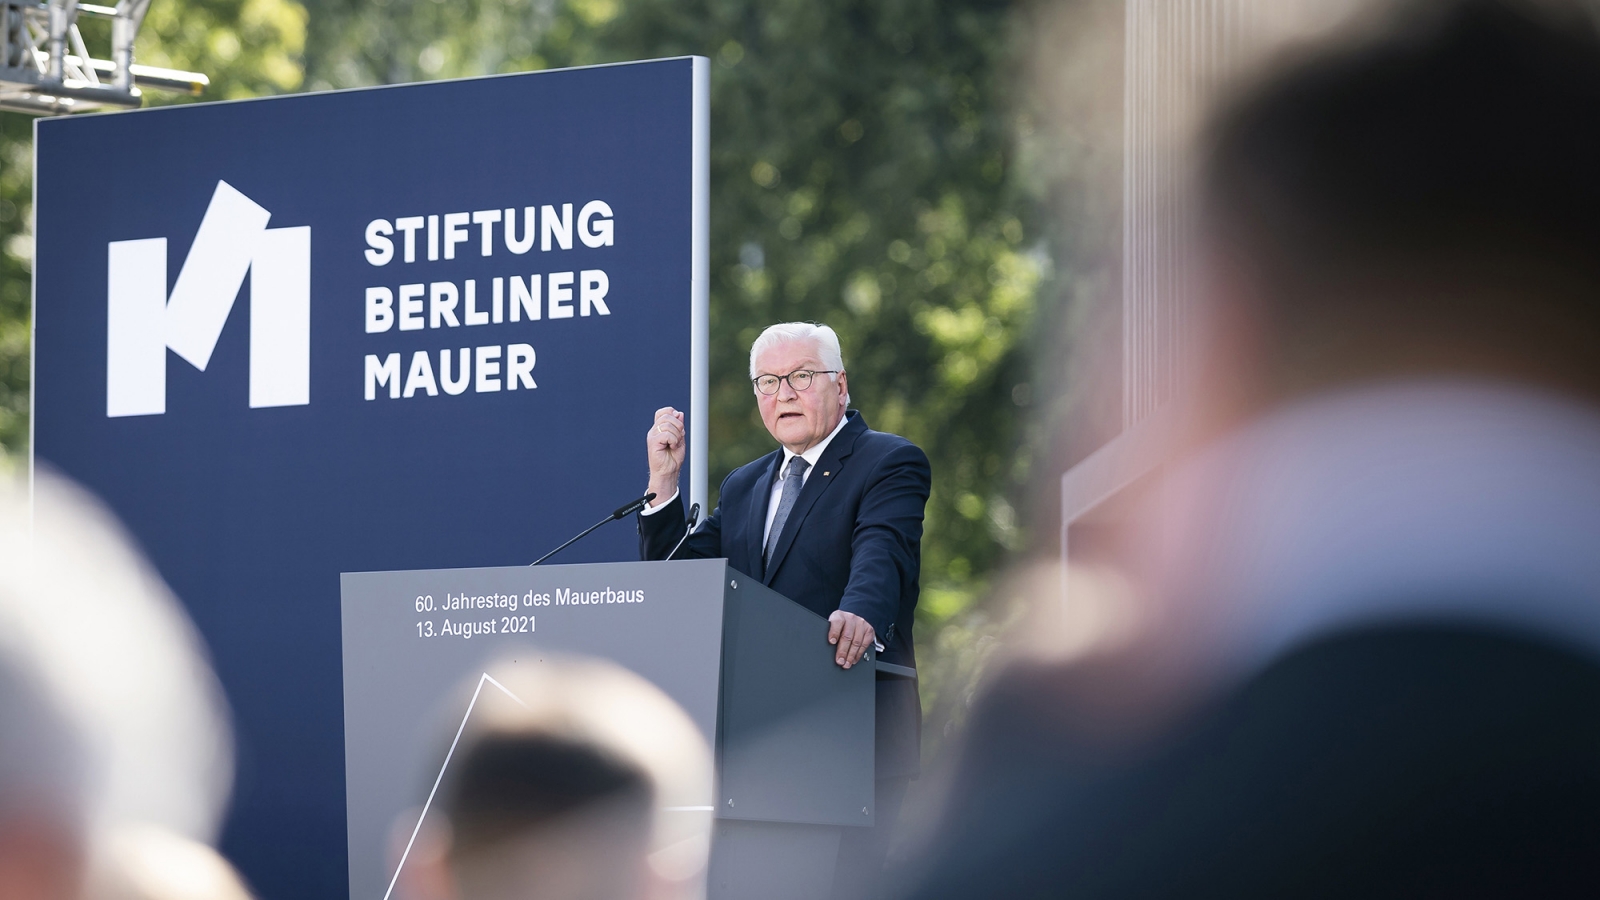 Federal President Frank Walter Steinmeier at the 60th anniversary of the building of the Wall